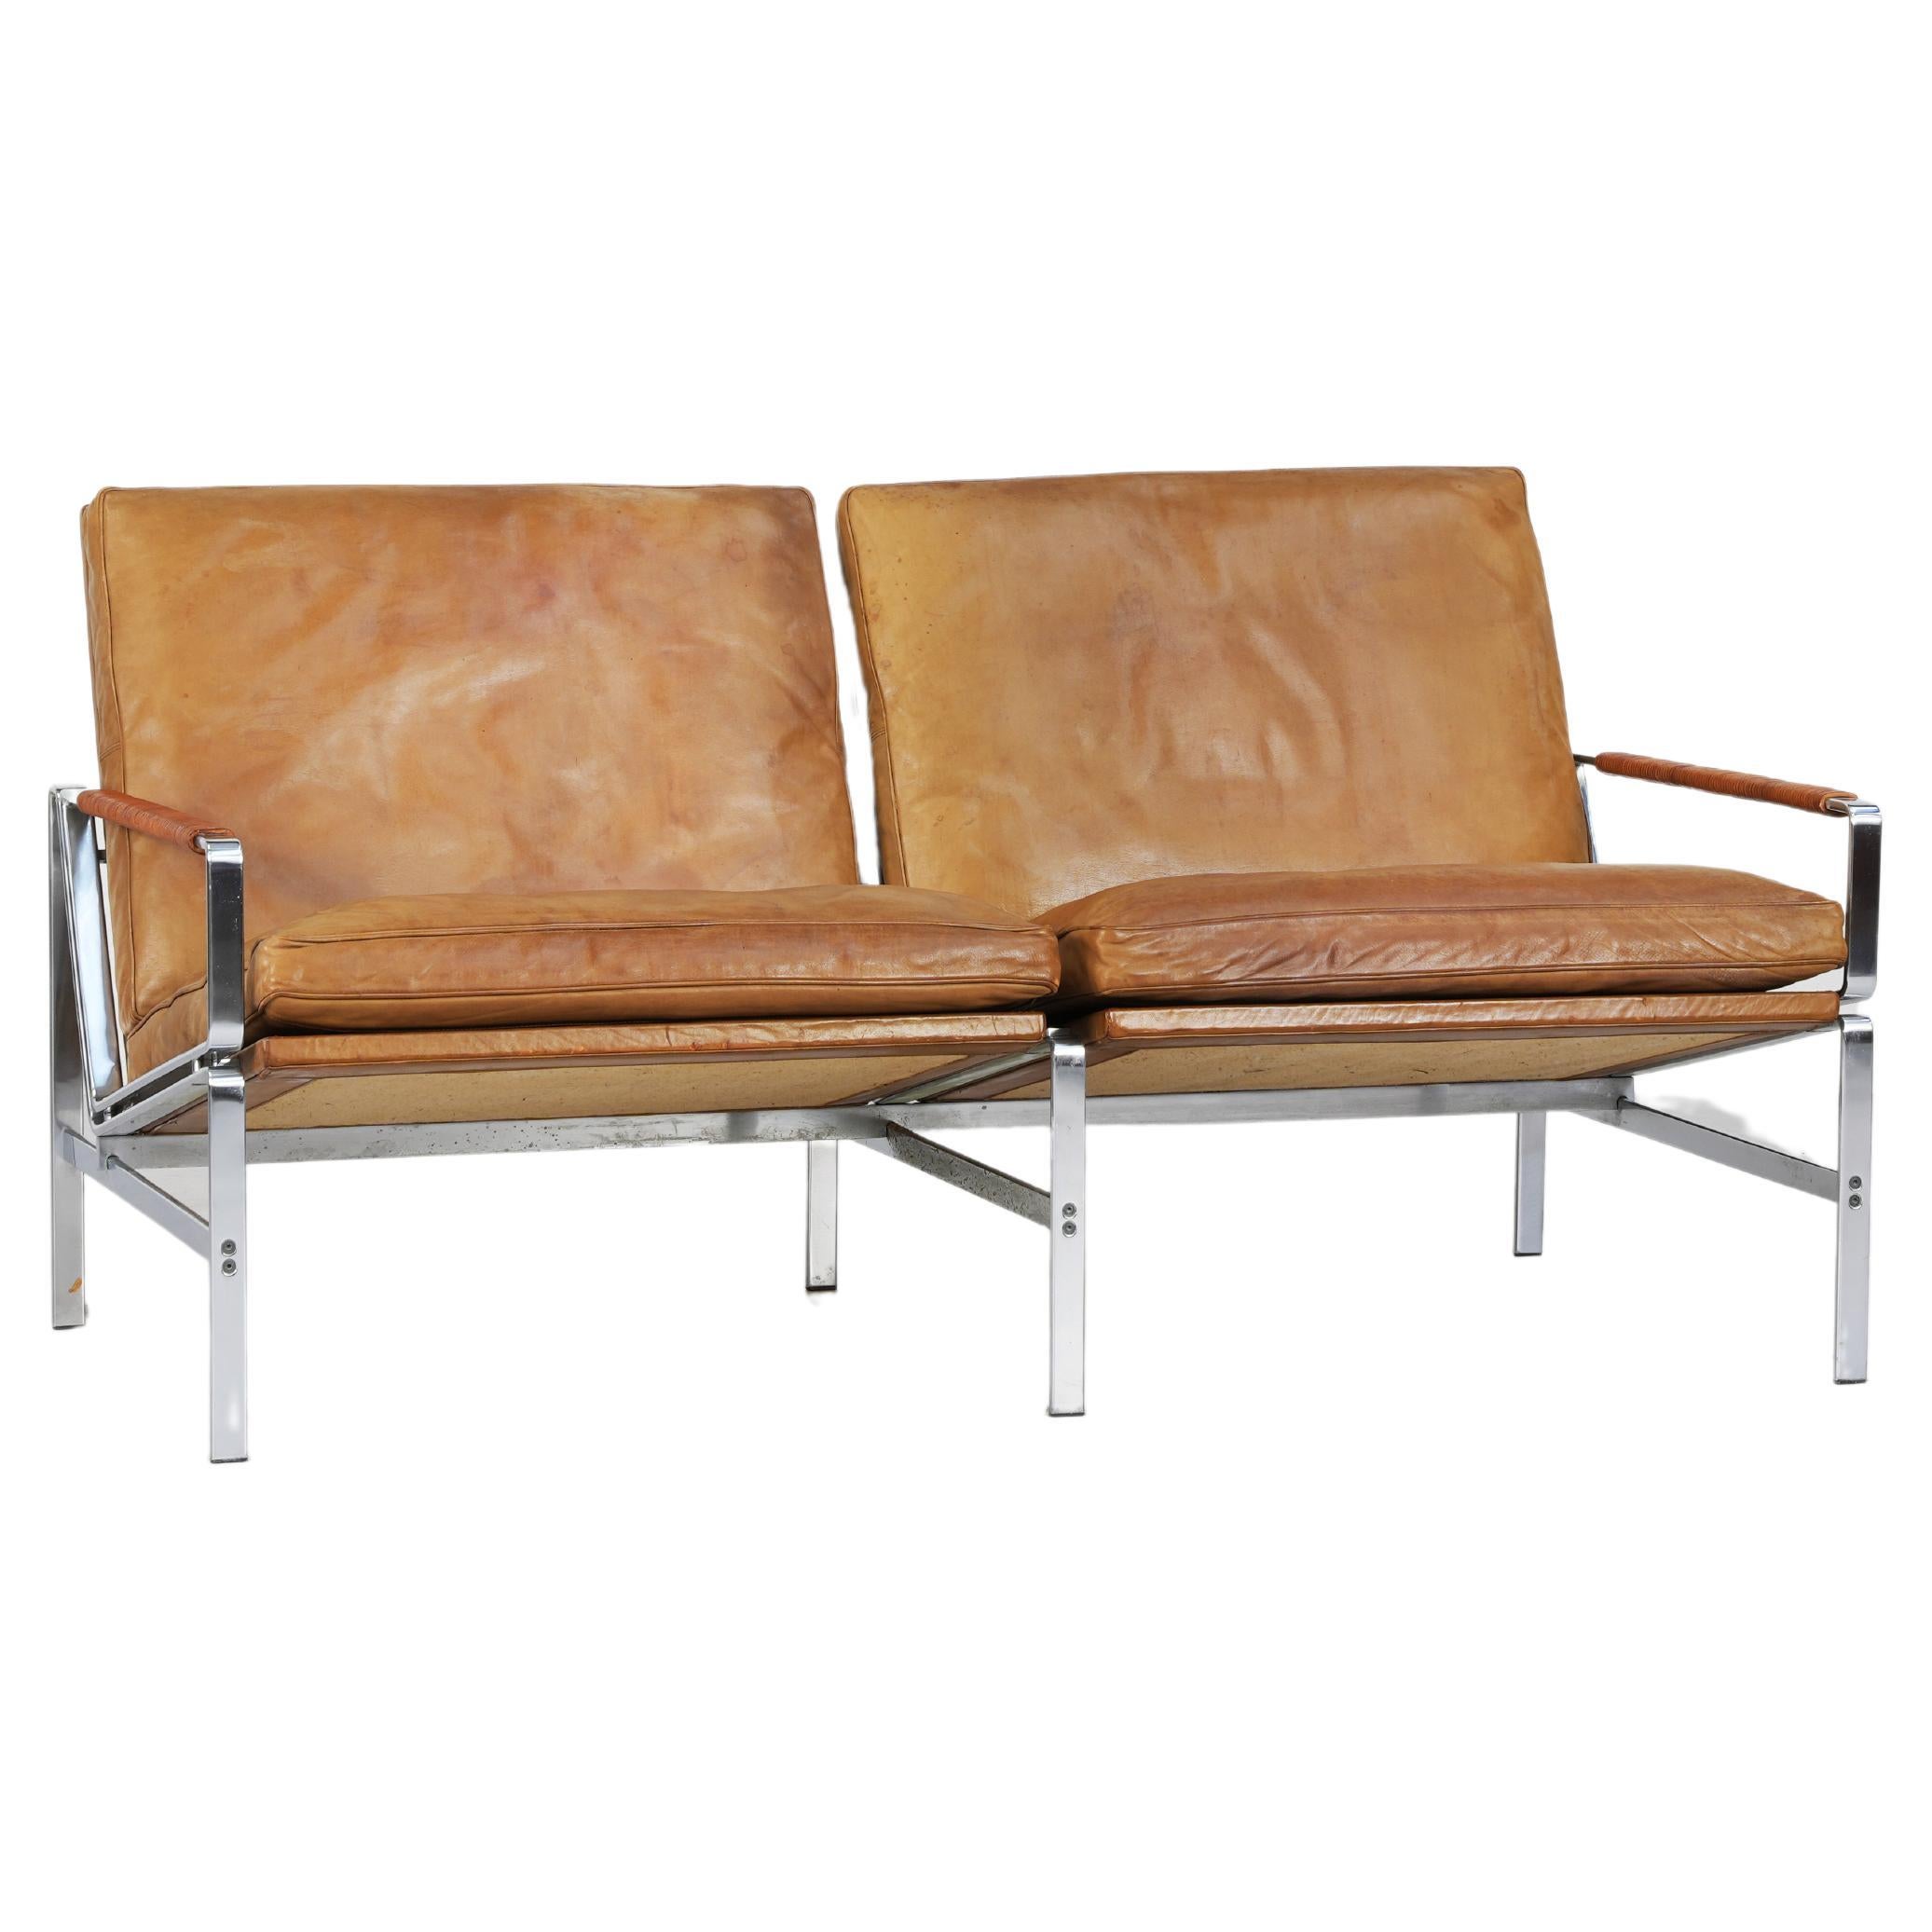 Danish Two Seater Sofa 6720 by Fabricius & Kastholm for Kill International, 1968